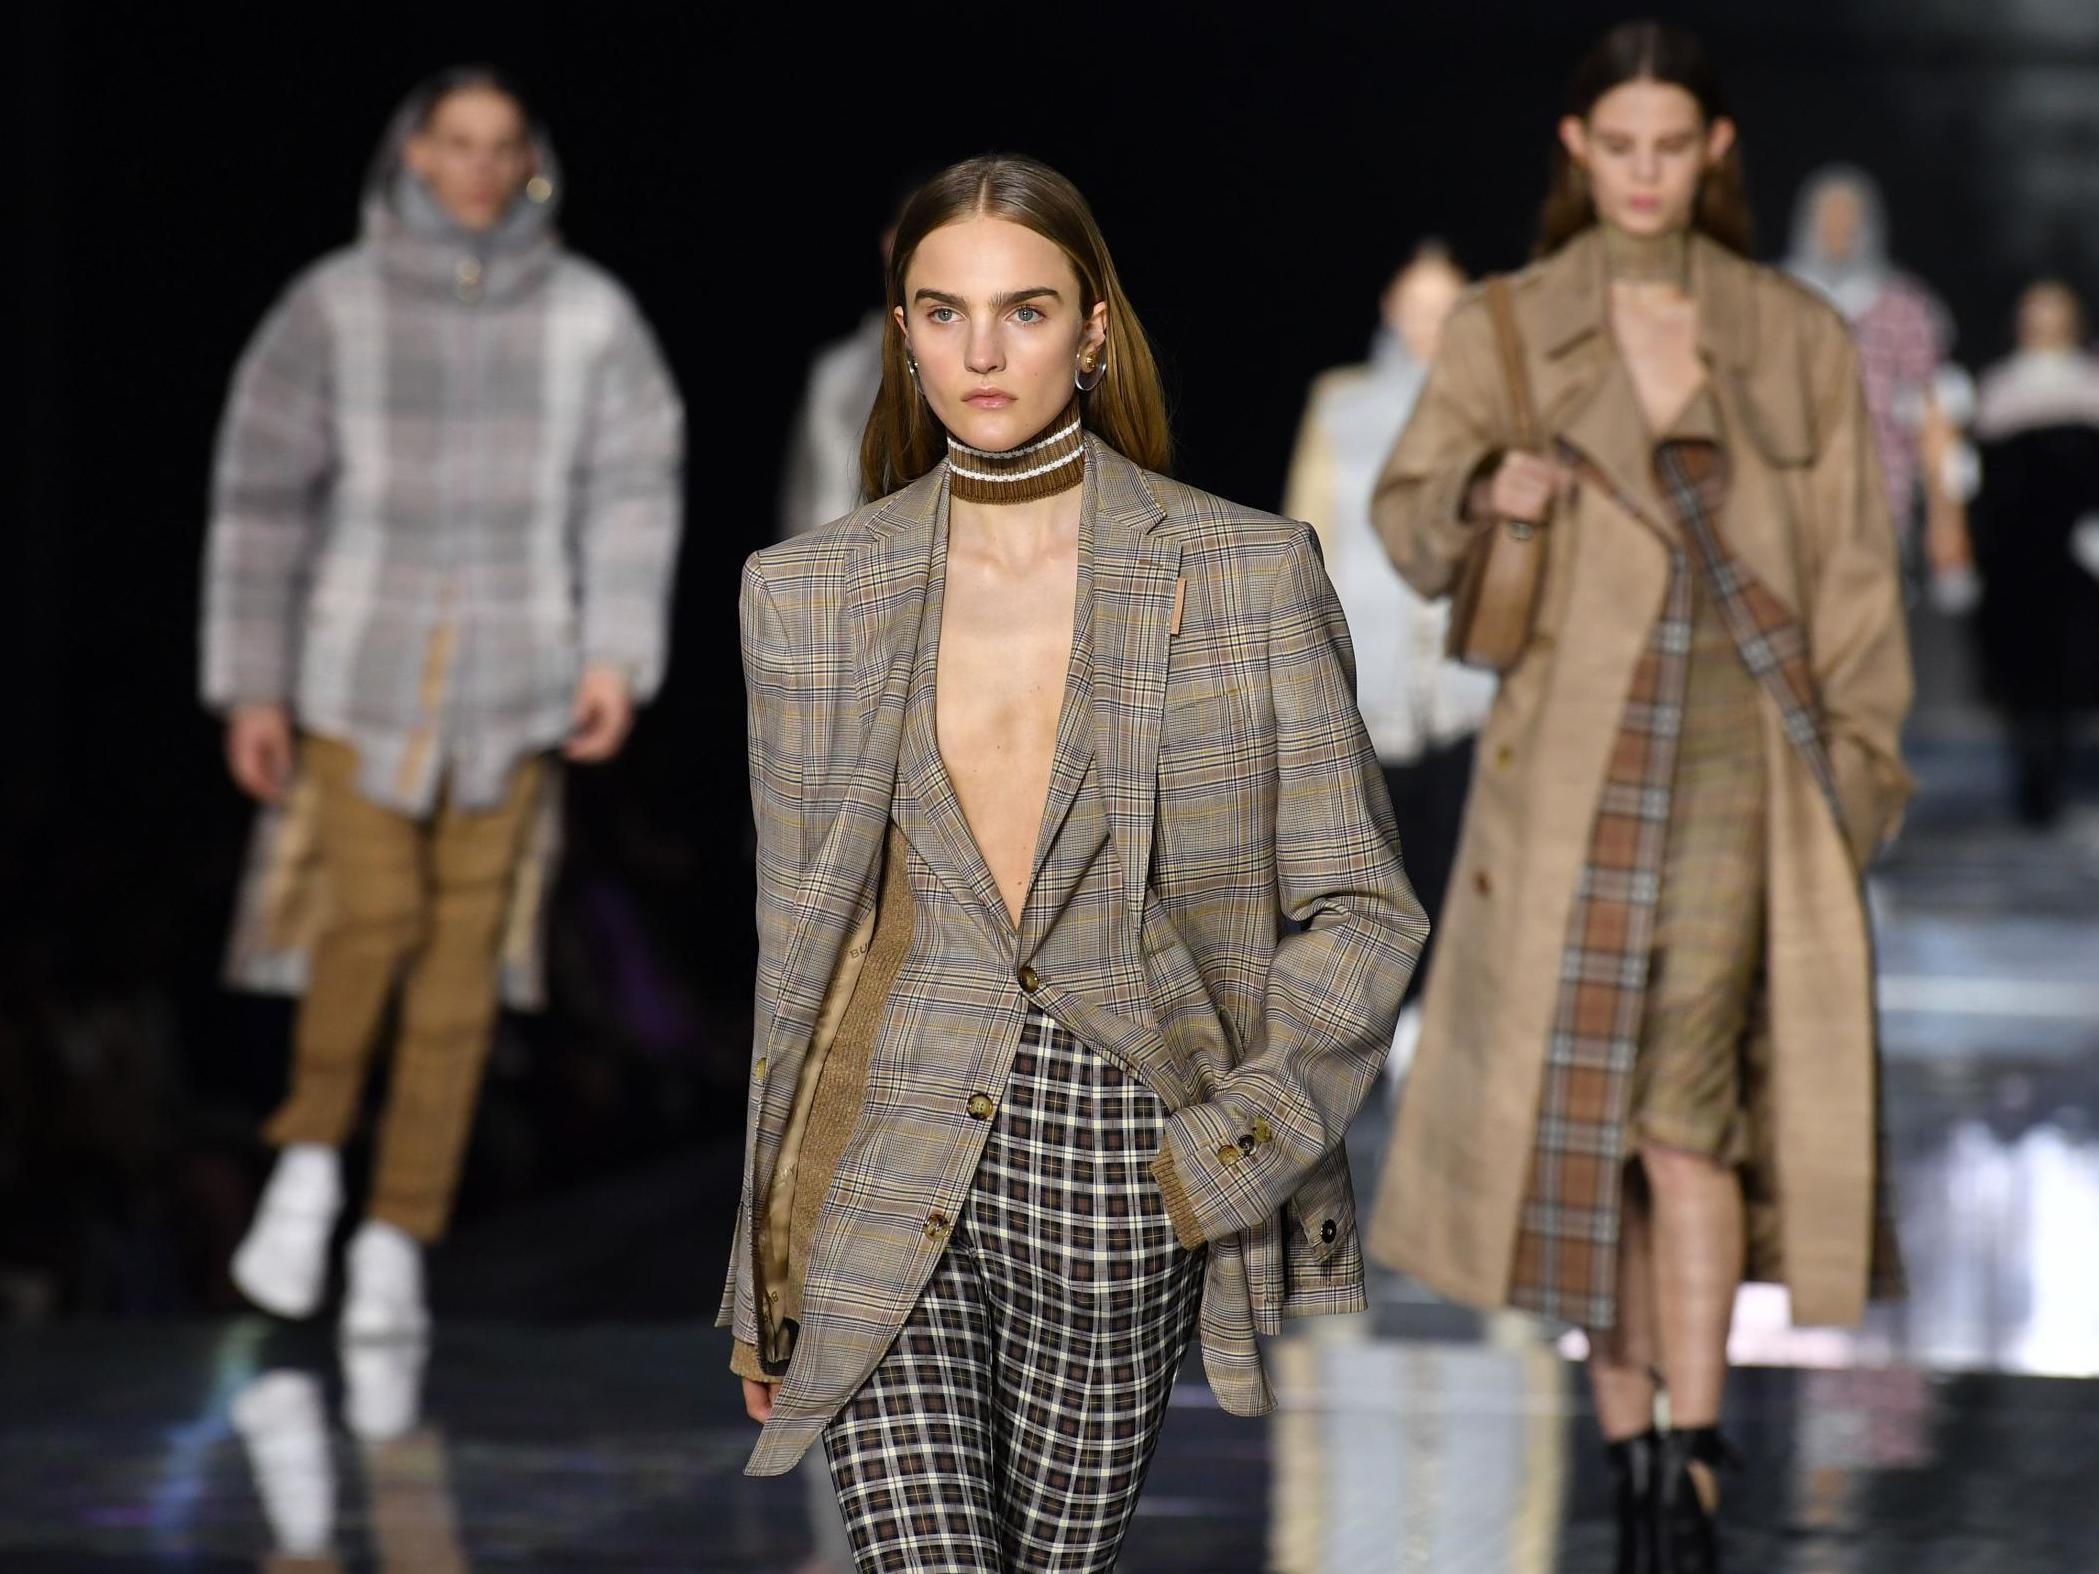 London Fashion Week September 2020 What we know so far The